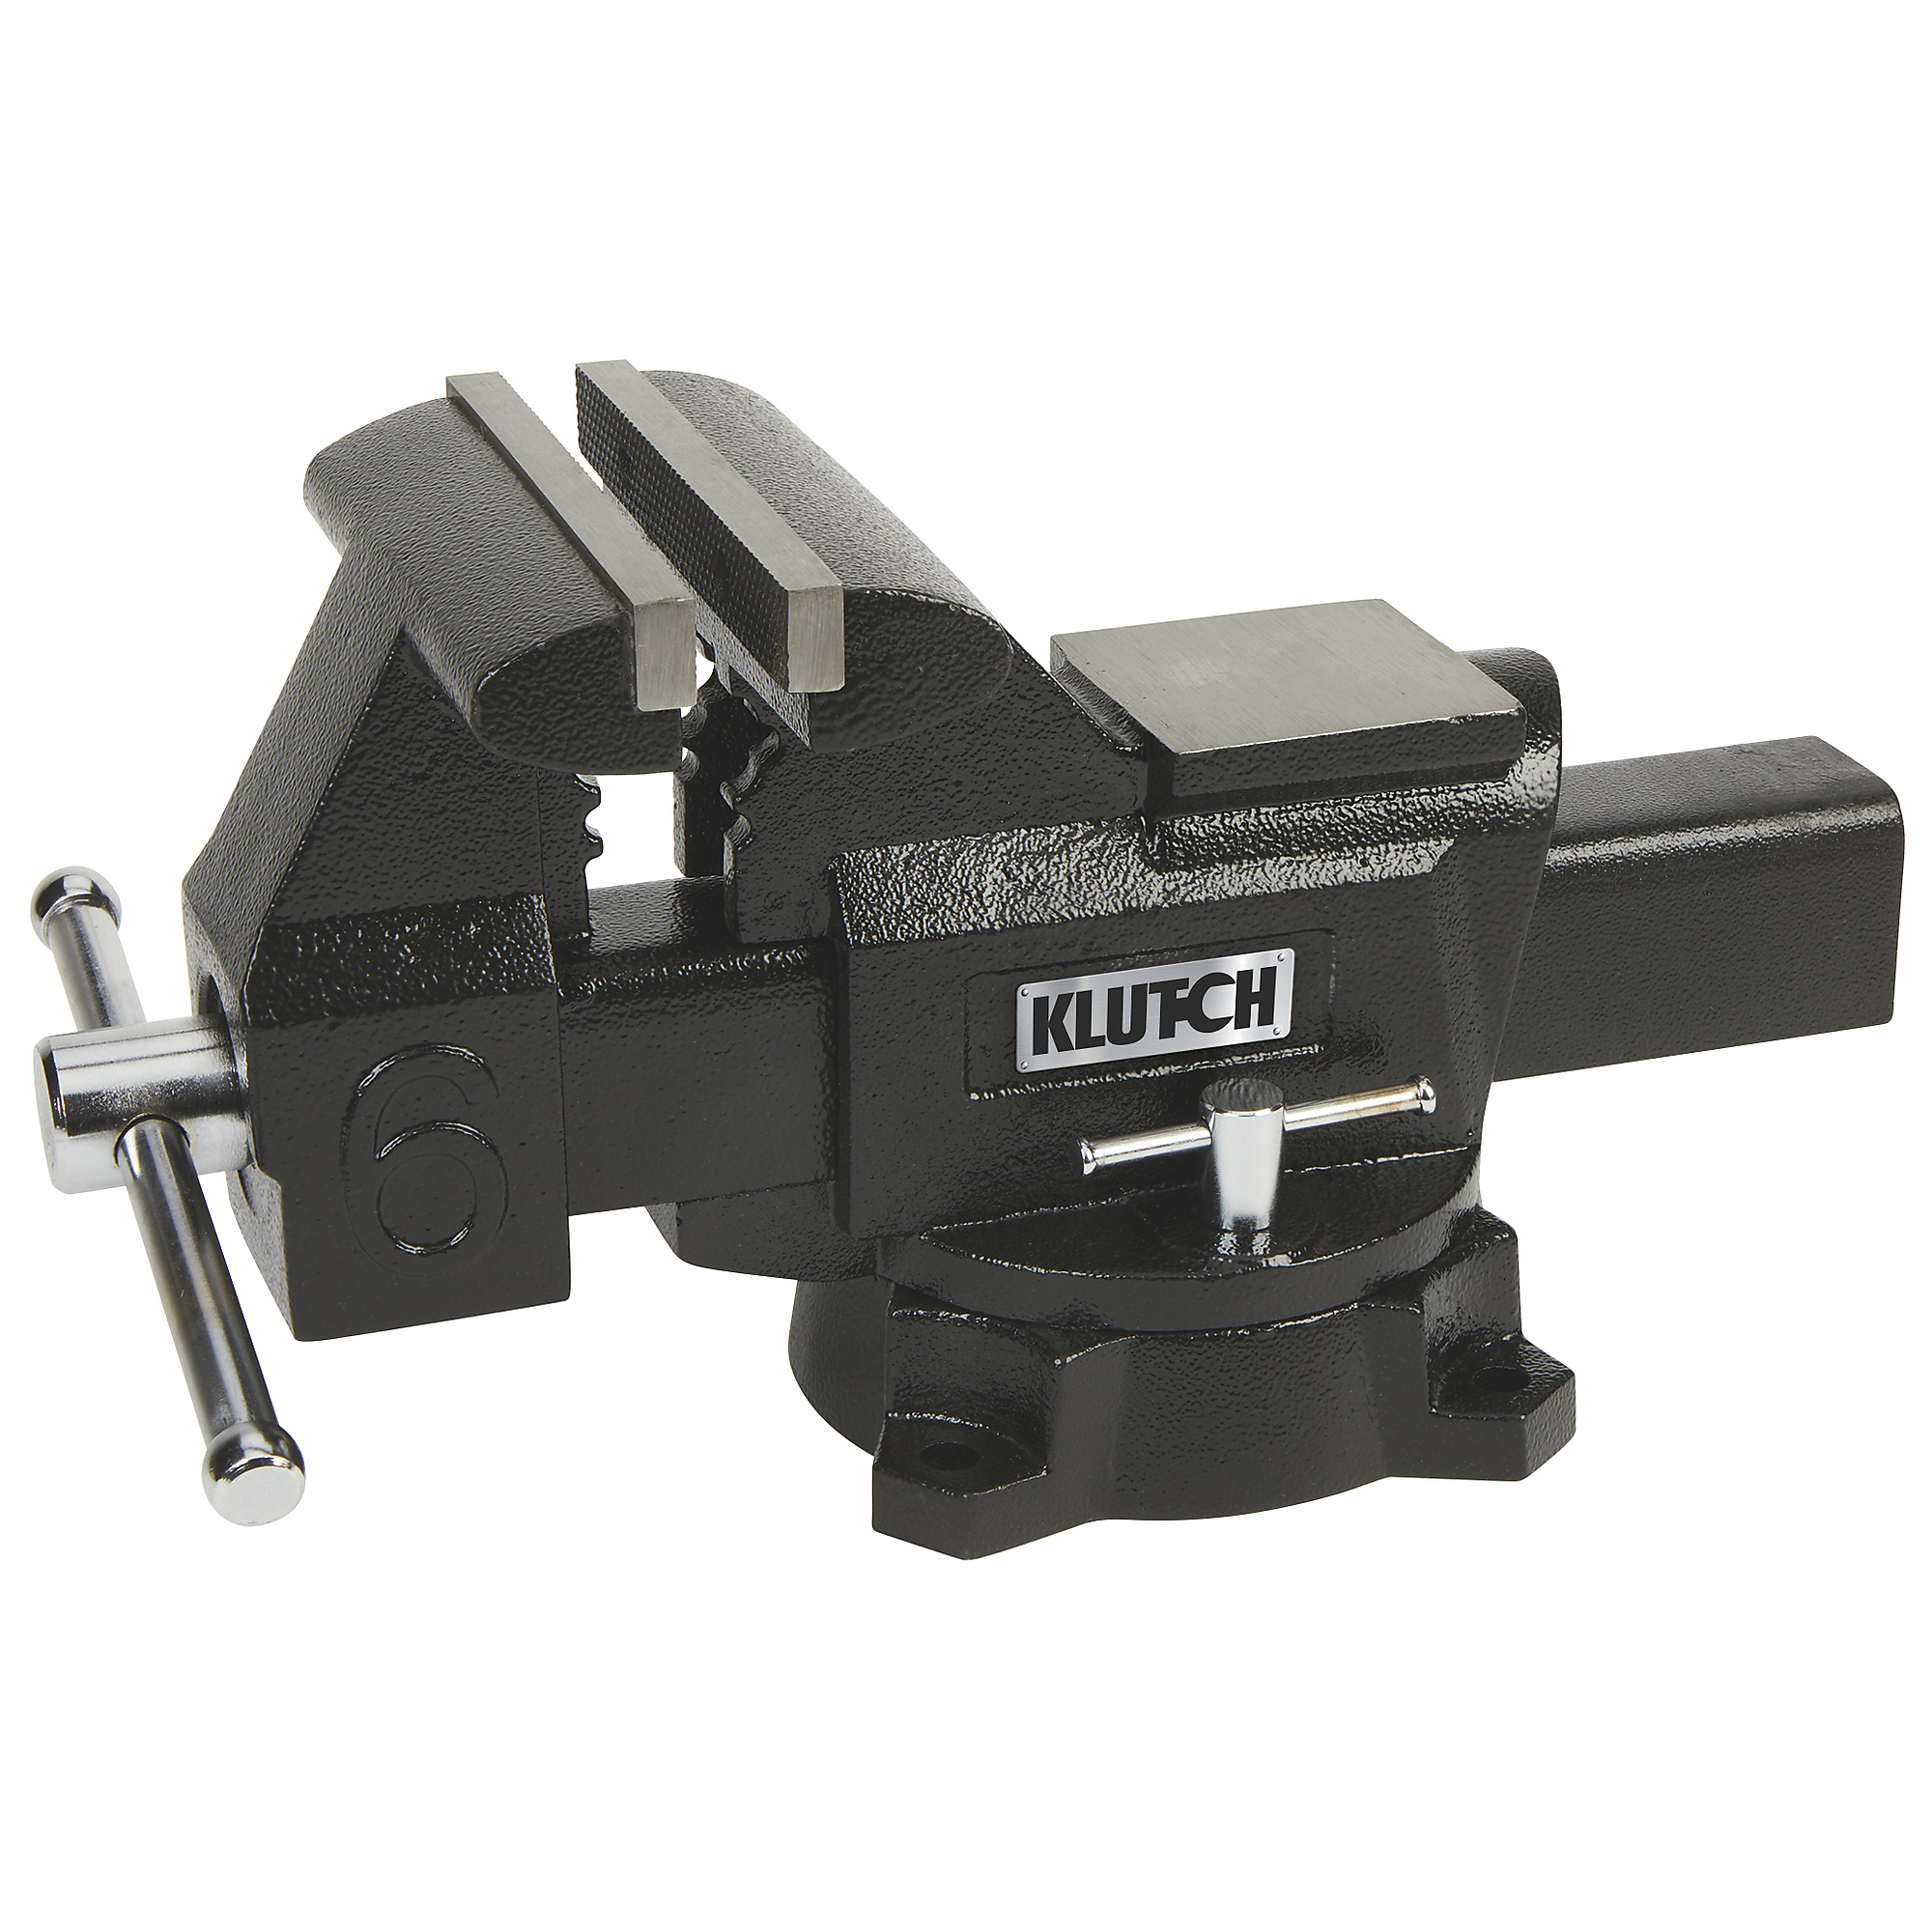 Klutch Heavy-Duty Carbon Steel Bench Vise, 6Inch Jaw Width, 6Inch Jaw Capacity, Model AT-HDV-06